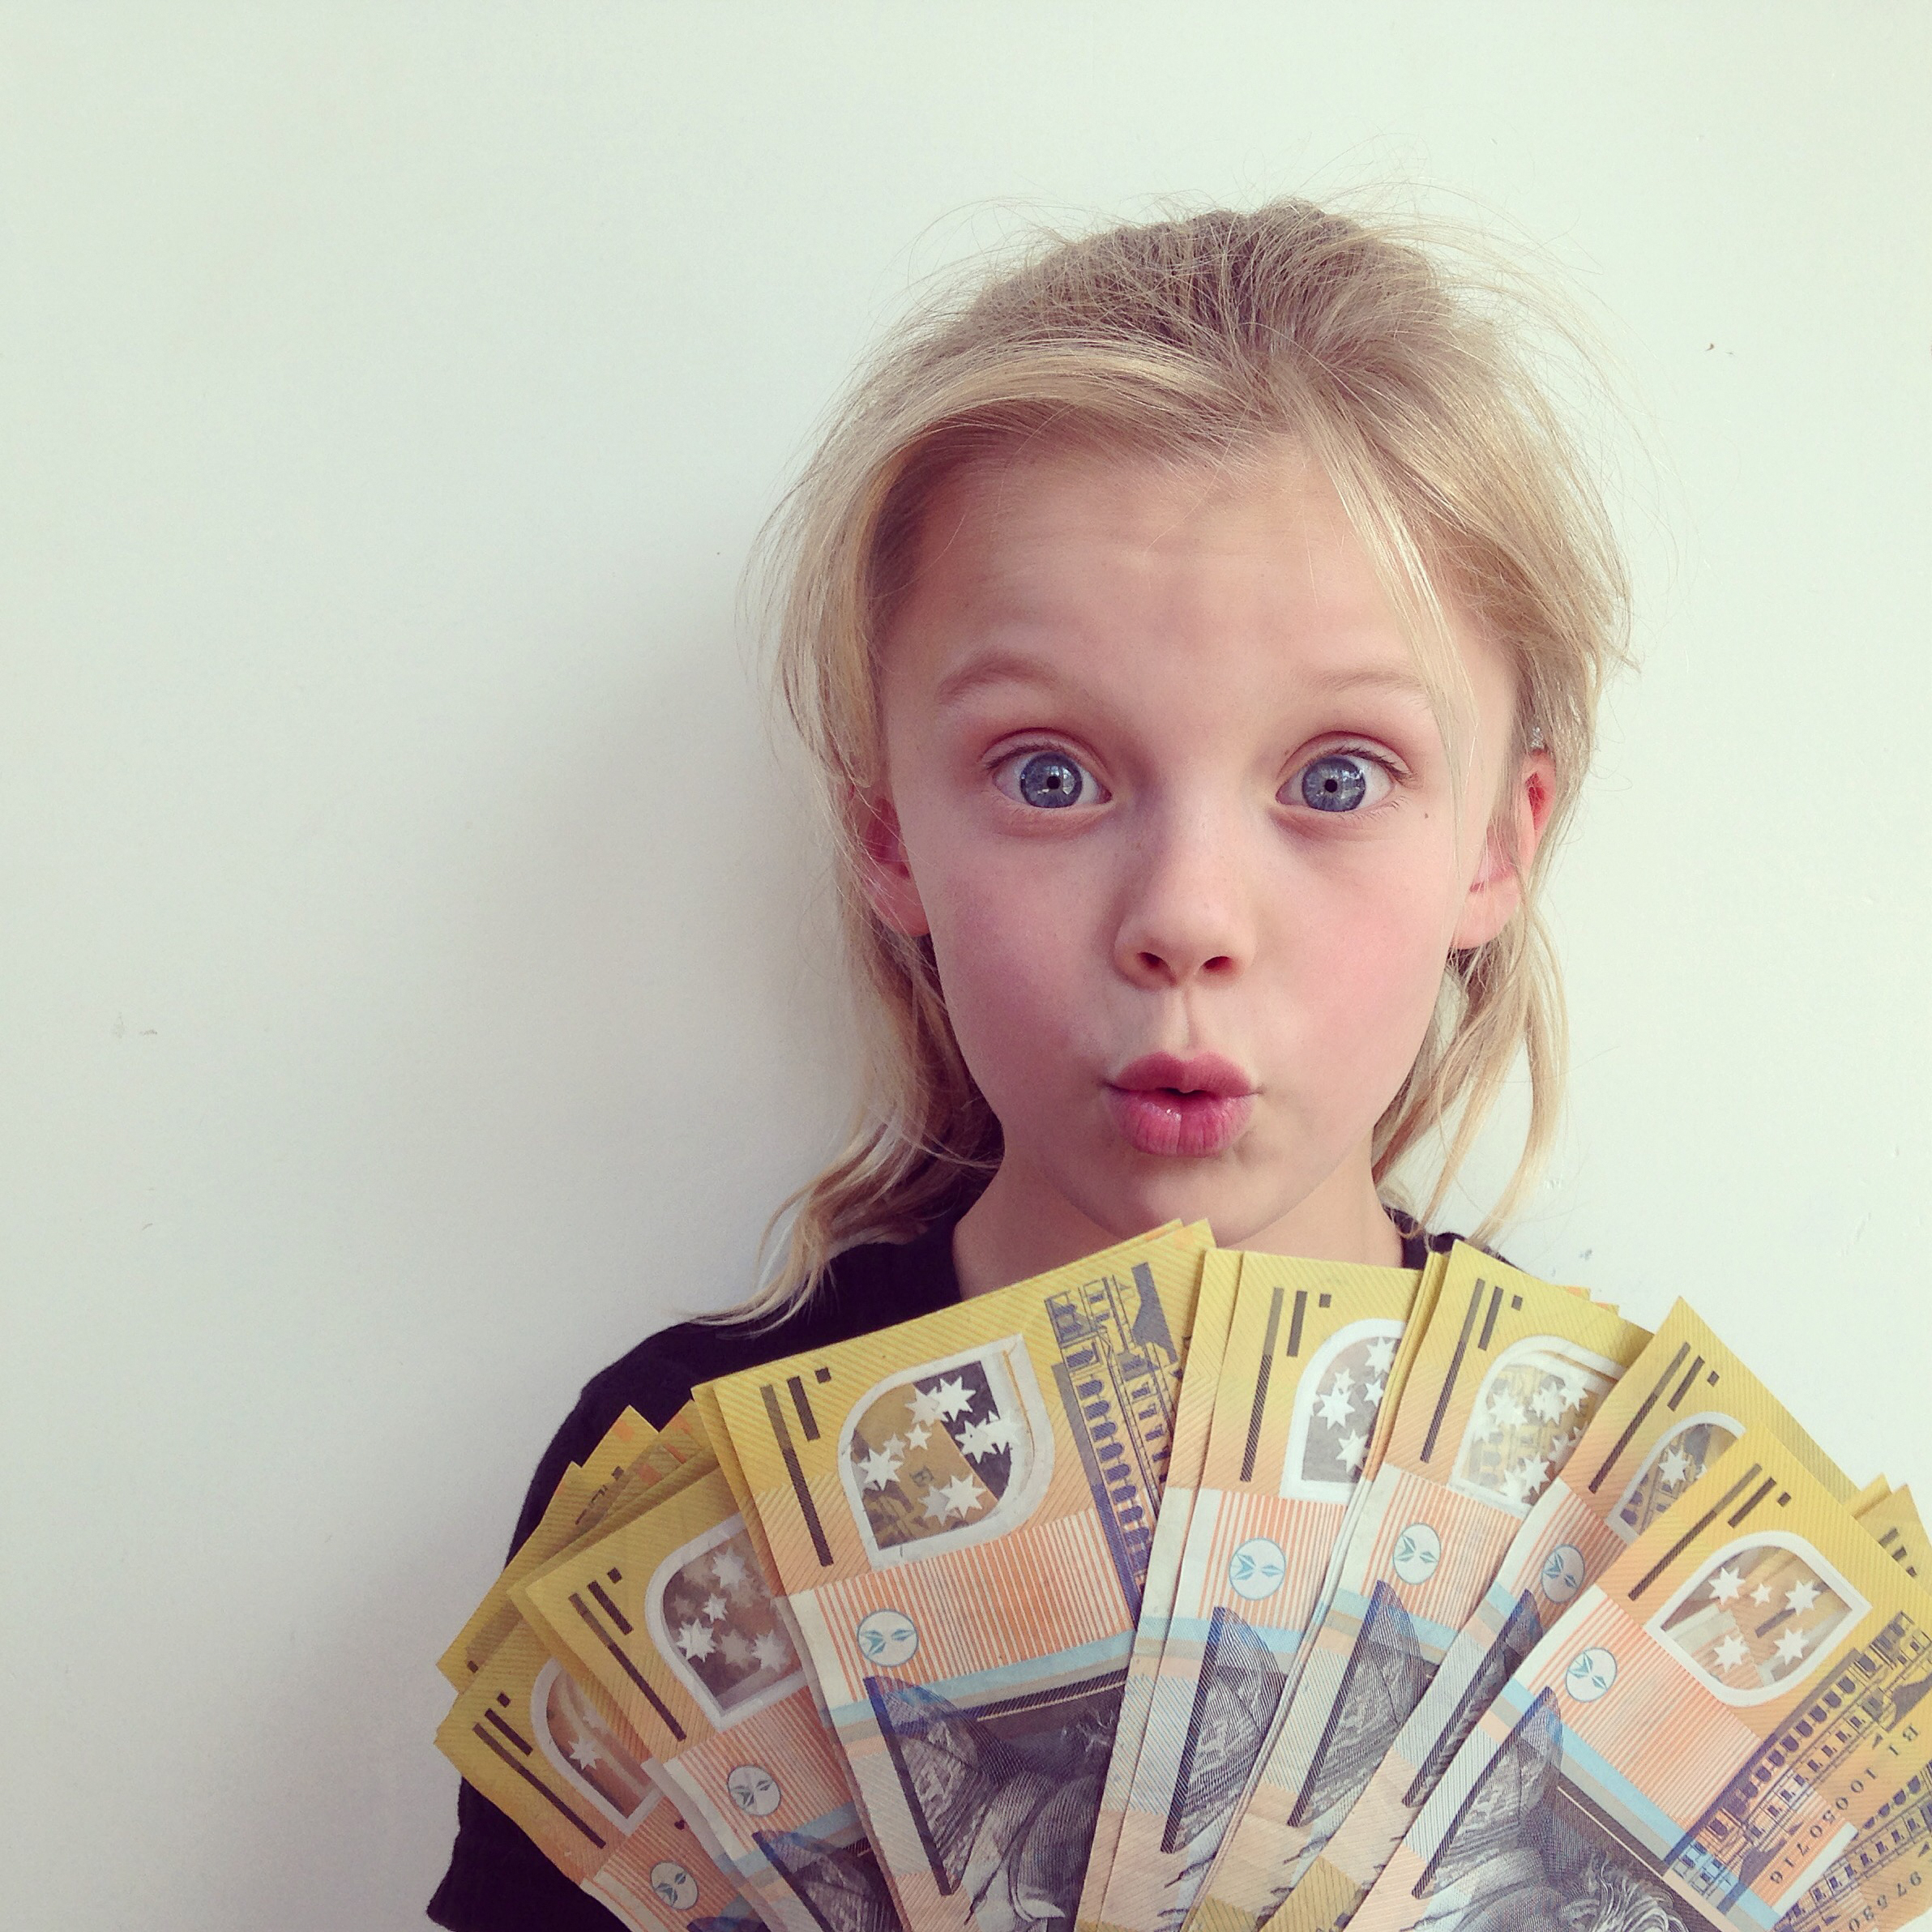 LISTEN: Why kids are so clueless about money.